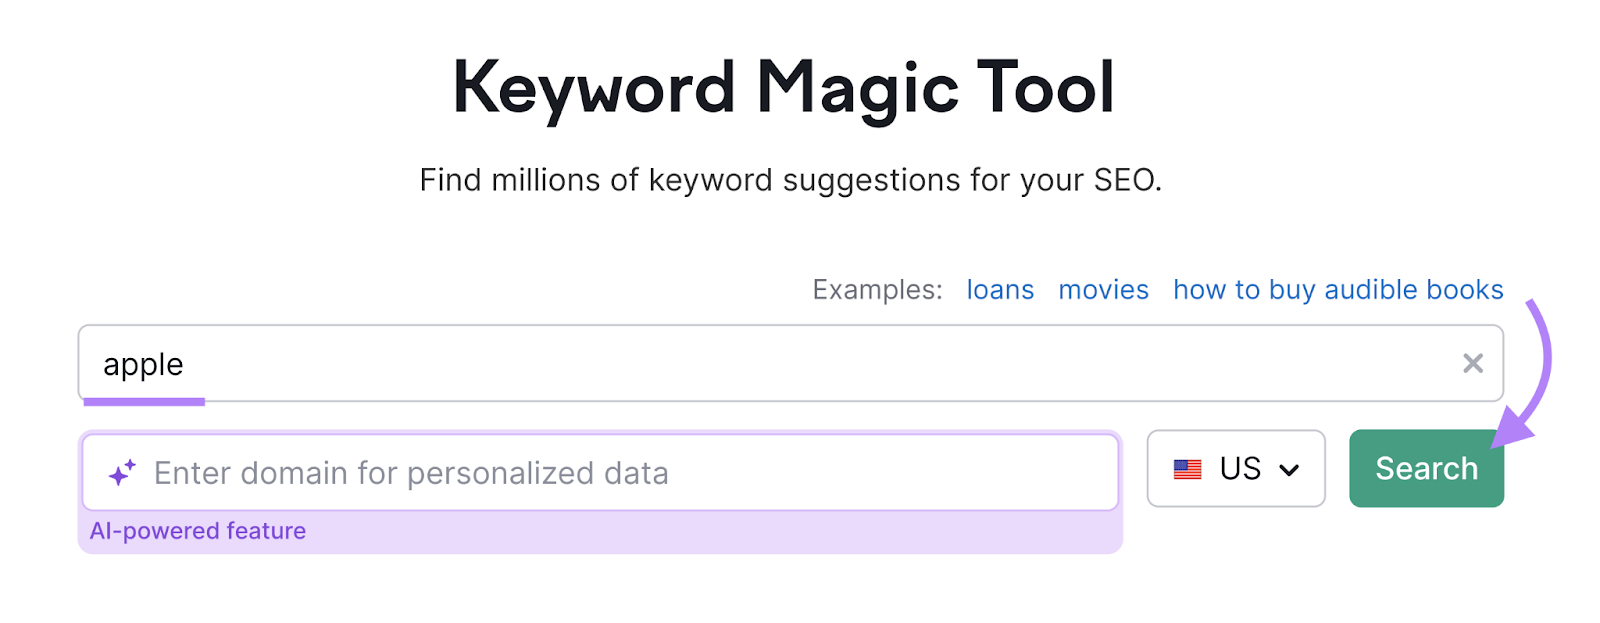 search for apple in keyword magic tool